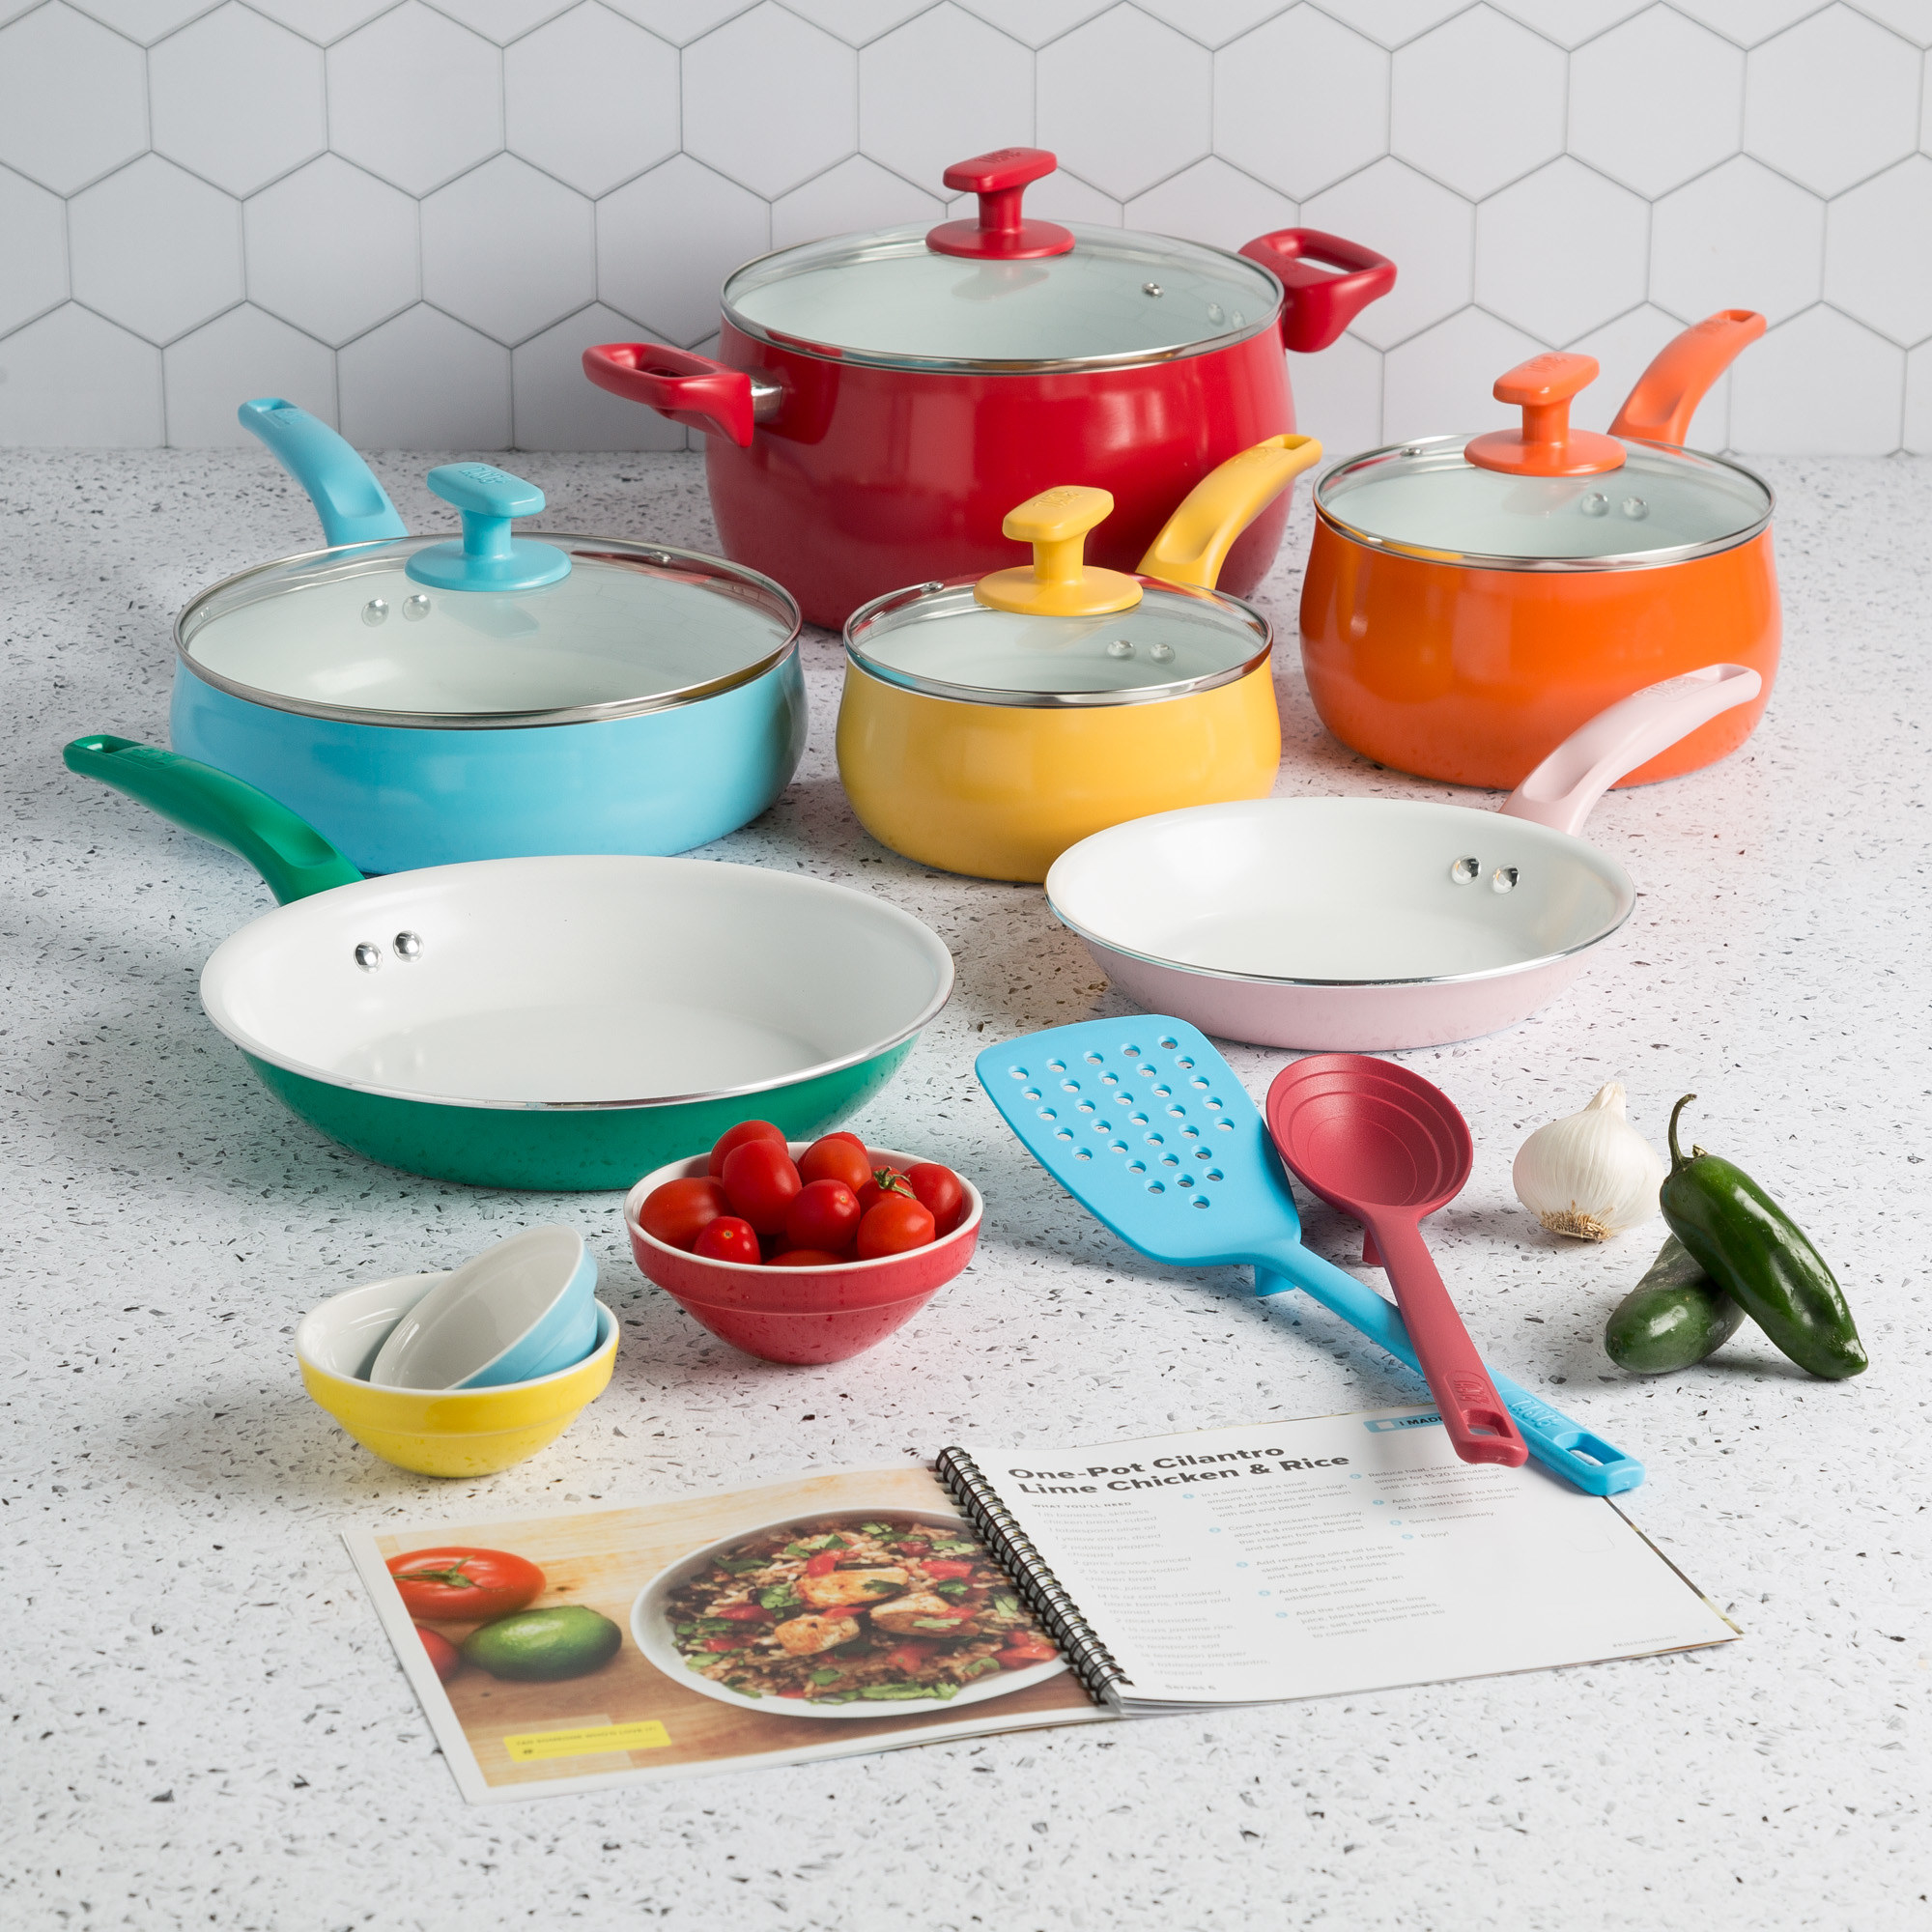 the colorful Tasty cookware set with frying pans, pots, saucepans, utensils, and small bowls